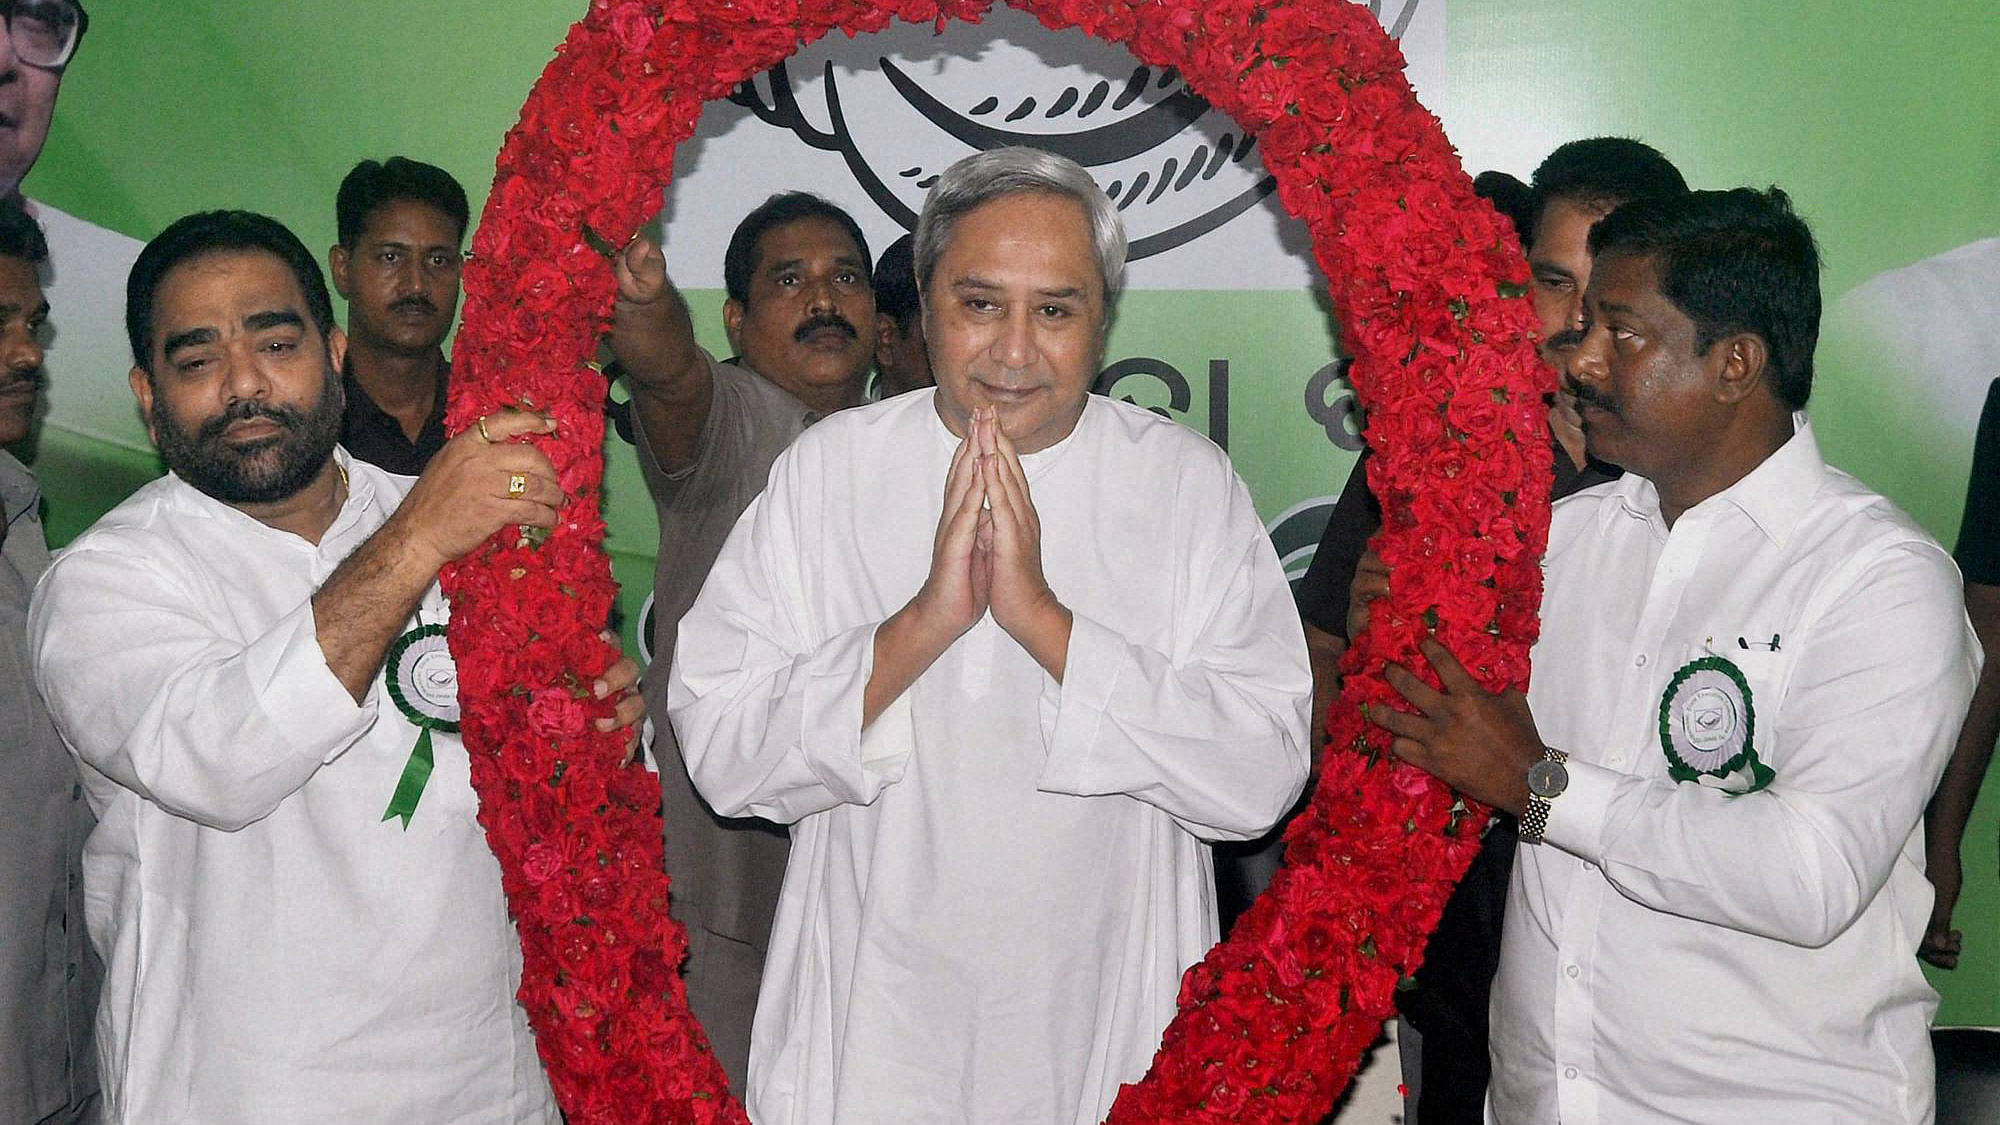 Odisha Chief Minister Naveen Patnaik is garlanded by BJD workers after his re-election as the party president during the party’s executive body meeting in Bhubaneswar, September 23, 2015. (Photo: PTI)